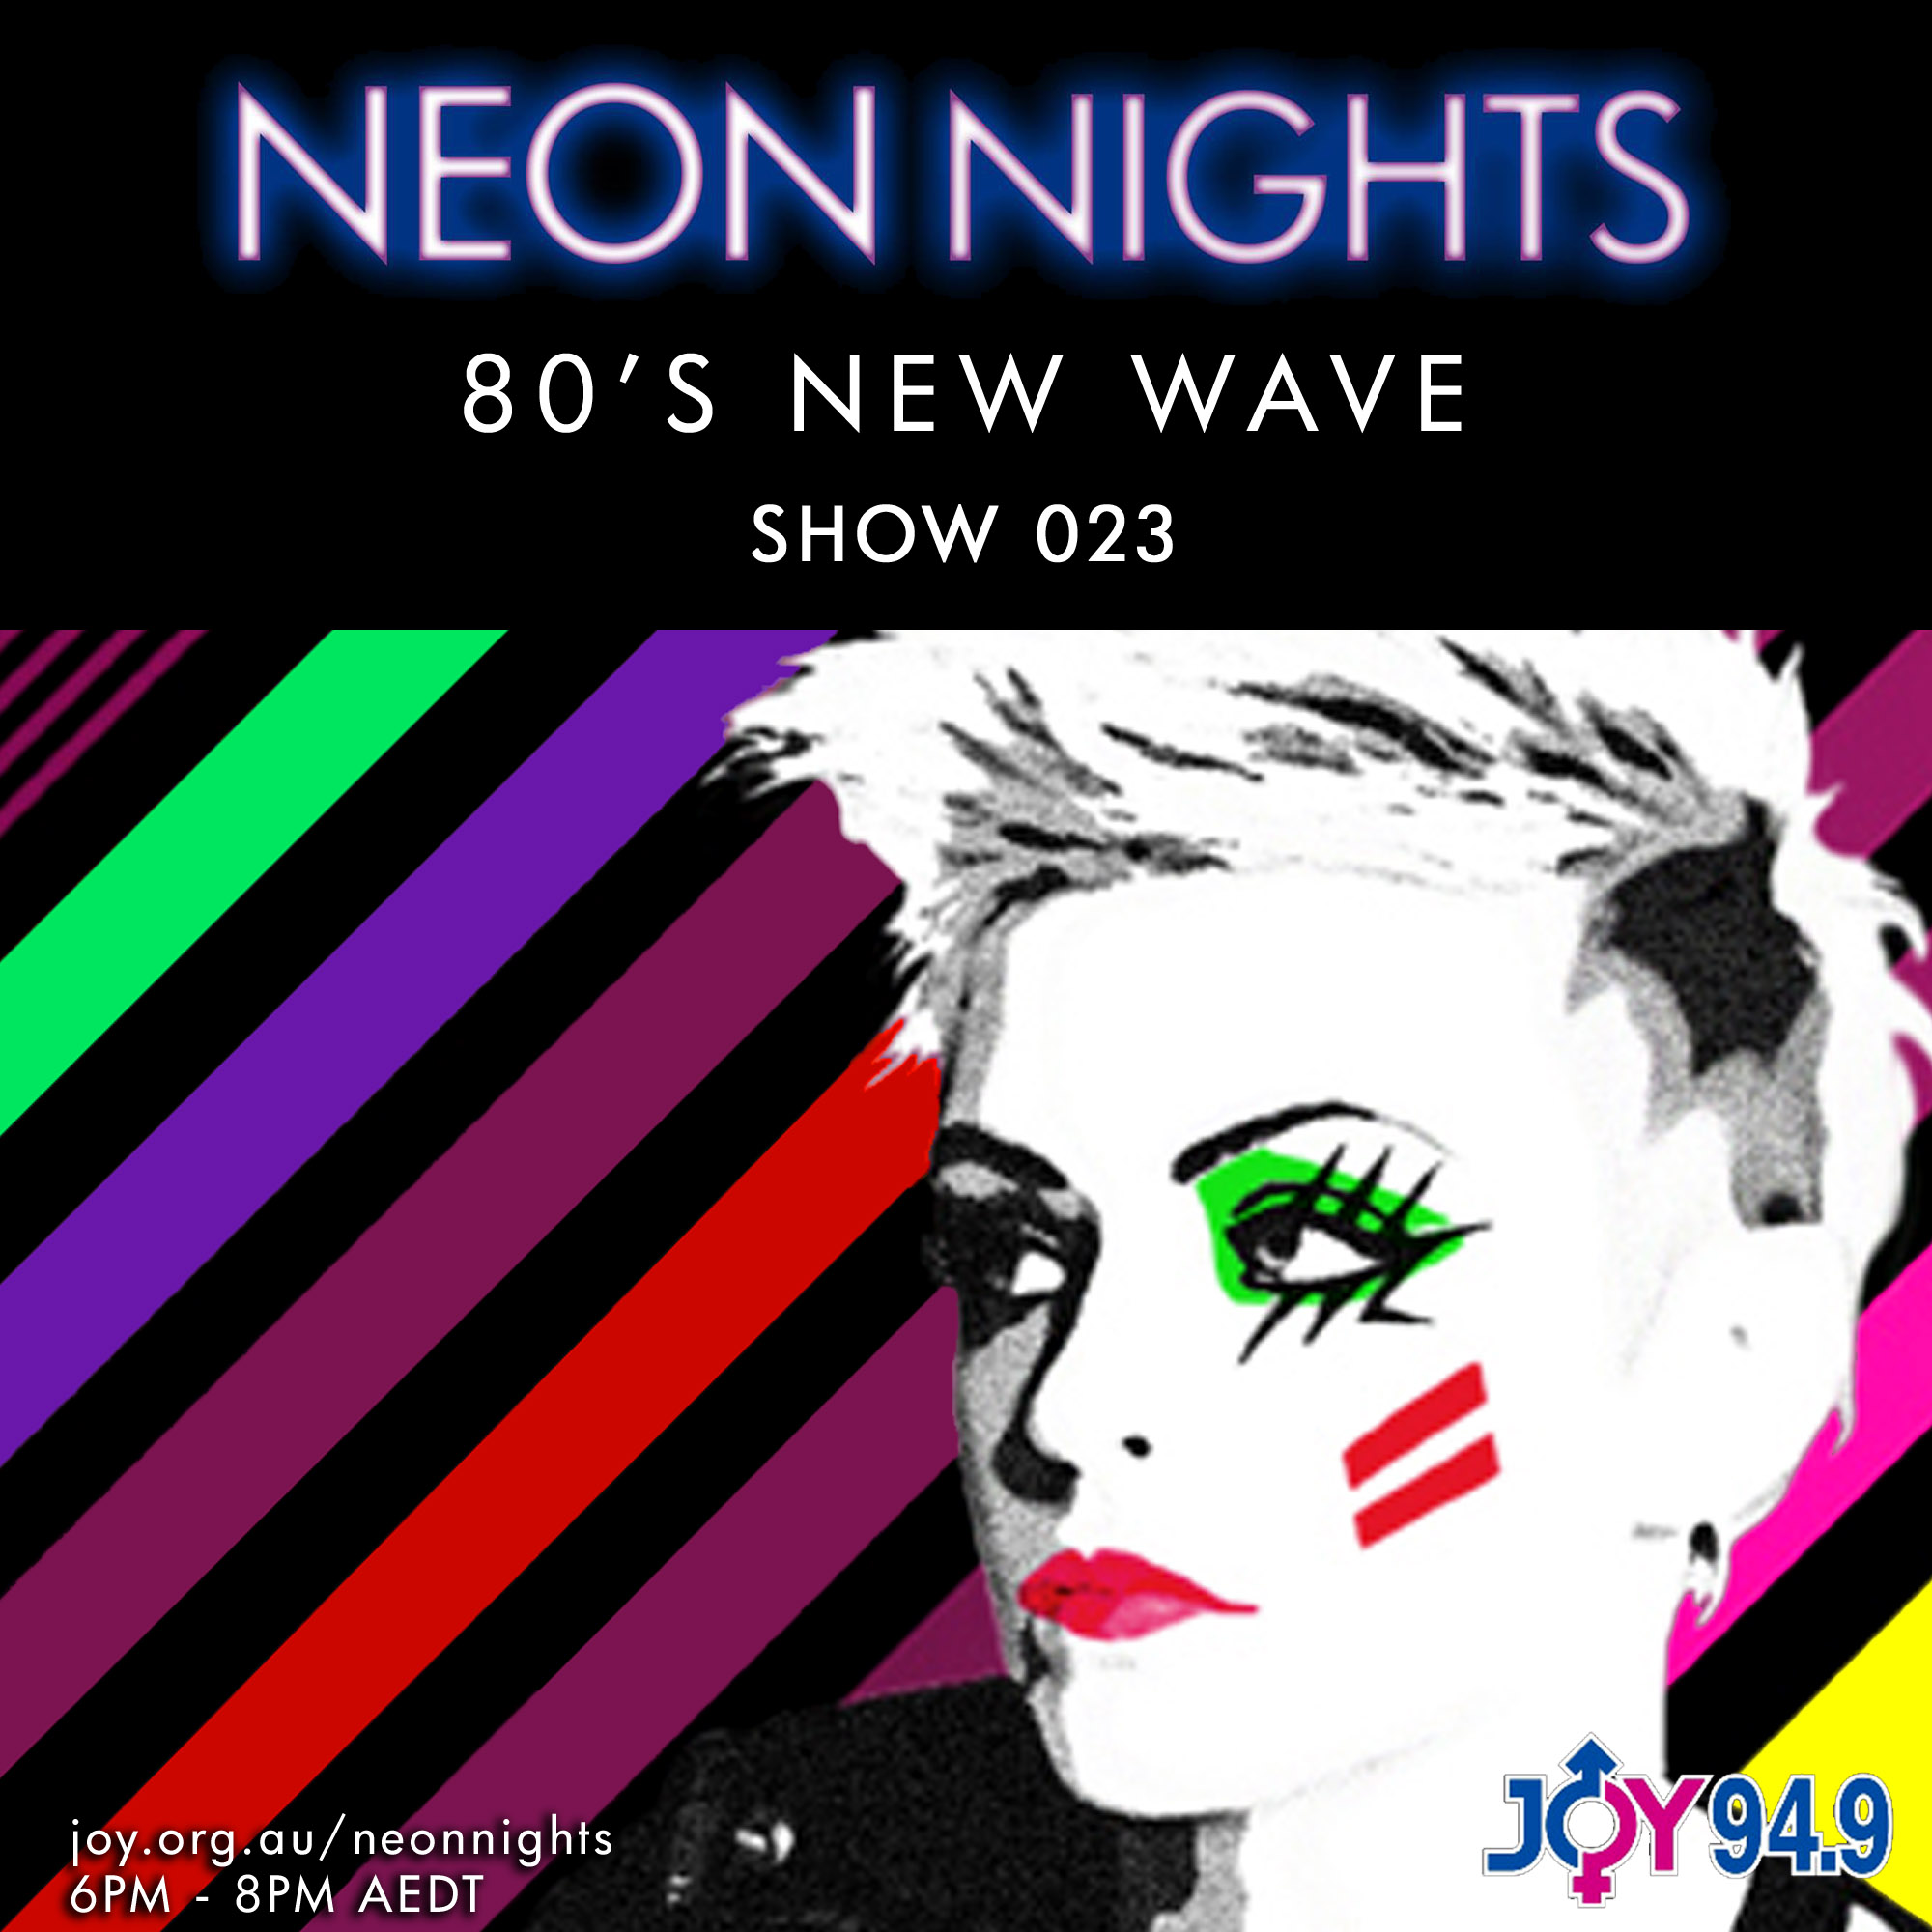 Show 023 / 80s New Wave Neon Nights